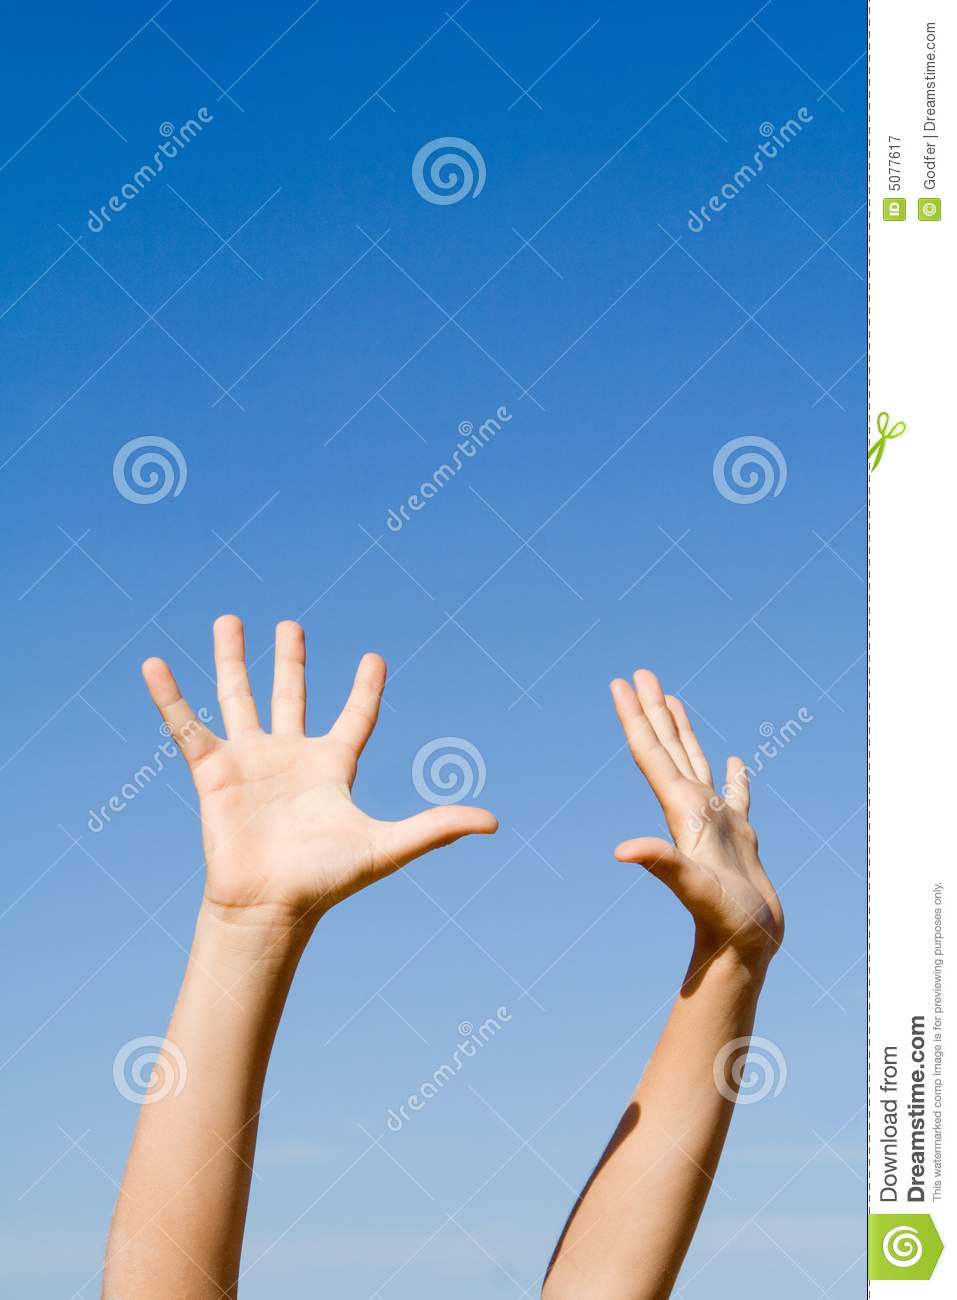 Arms Raised Hands Reaching Royalty Free Stock Photography   Image    